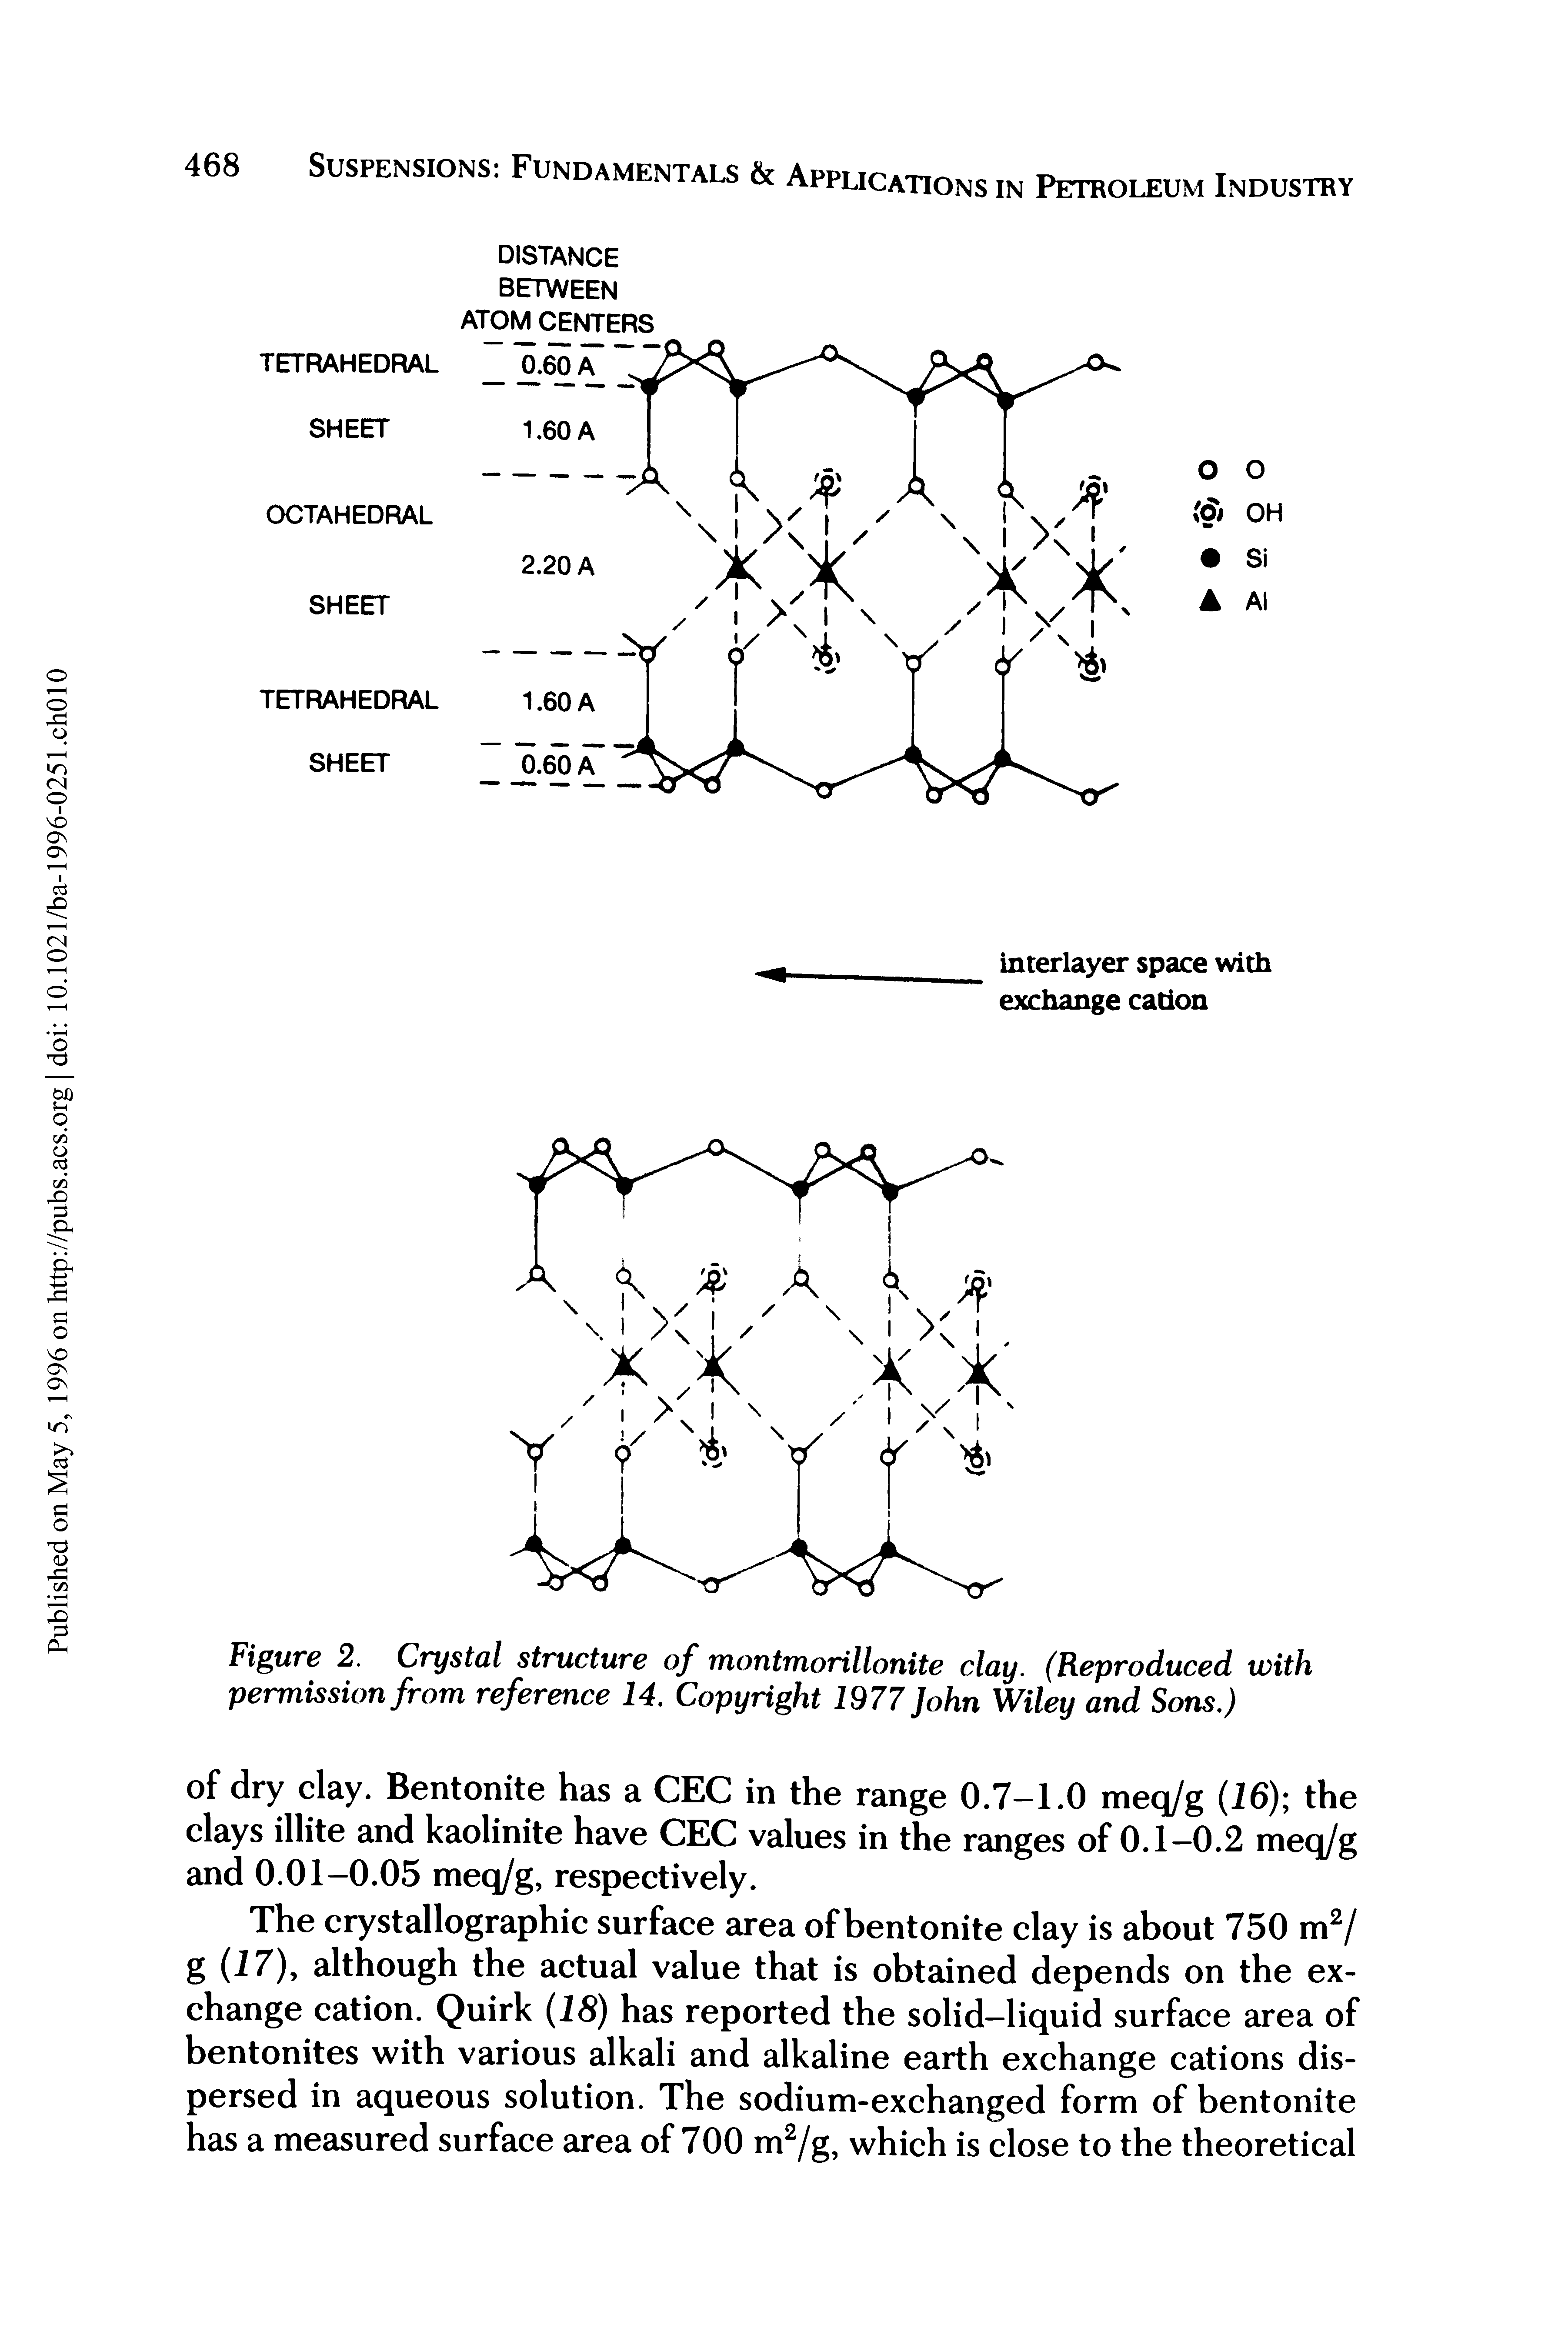 Figure 2. Crystal structure of montmorillonite clay. (Reproduced with permission from reference 14. Copyright 1977 John Wiley and Sons.)...